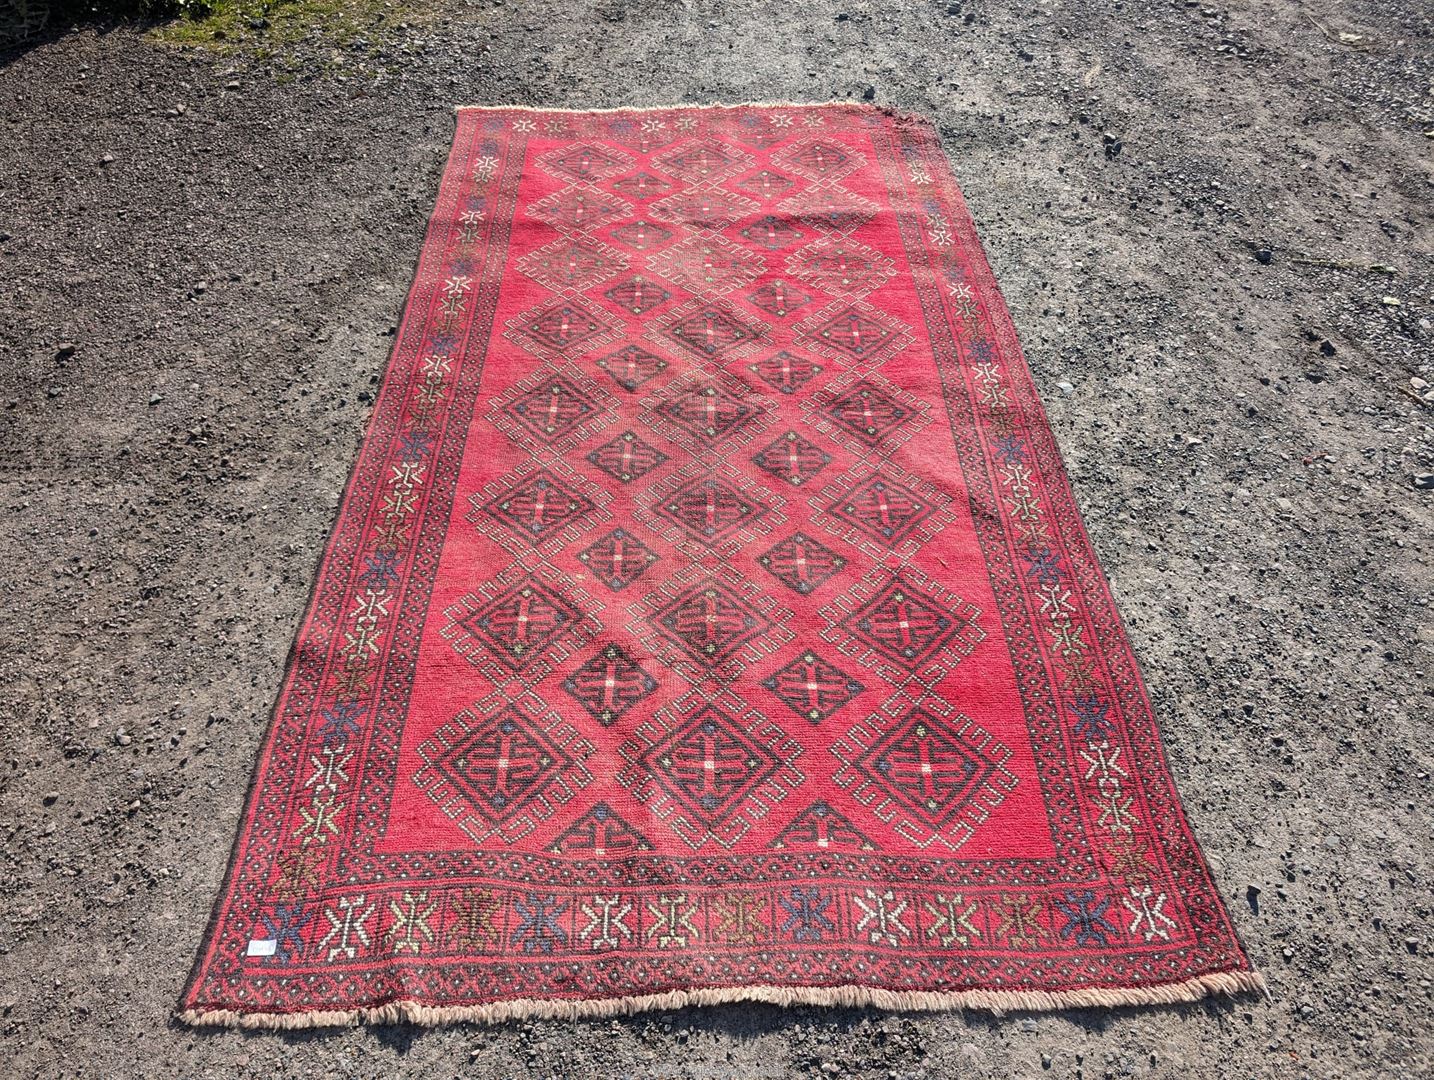 A large border patterned rug on a red ground having black central diamonds,